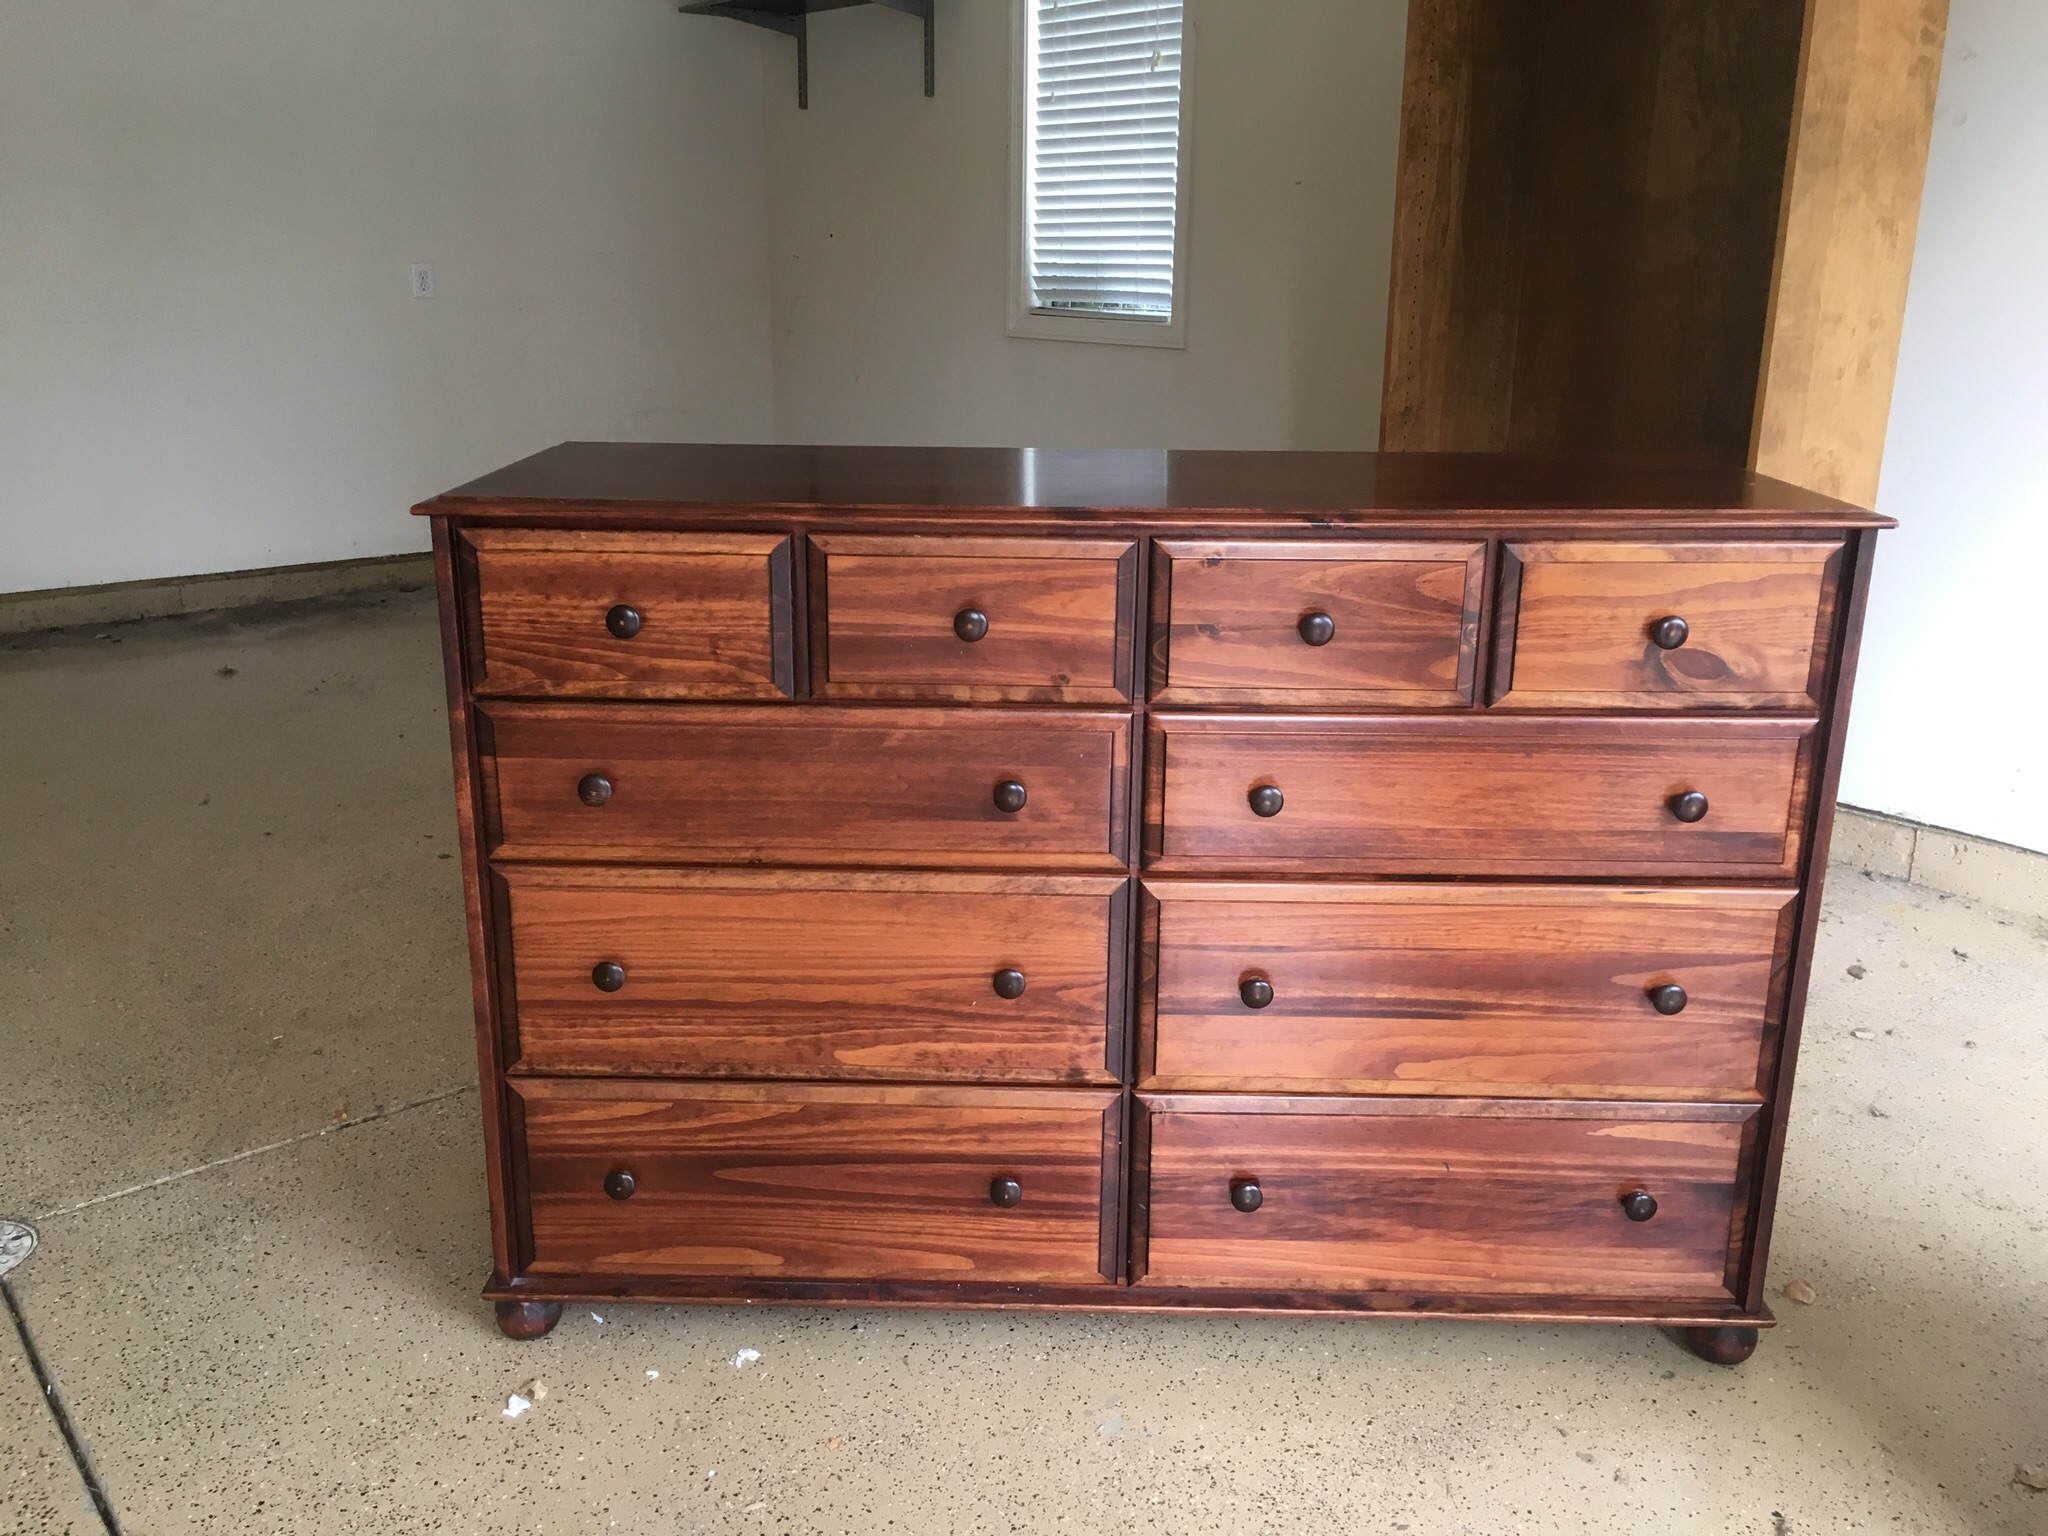 Used Dresser Redo Carrell S Unfinished Furniture